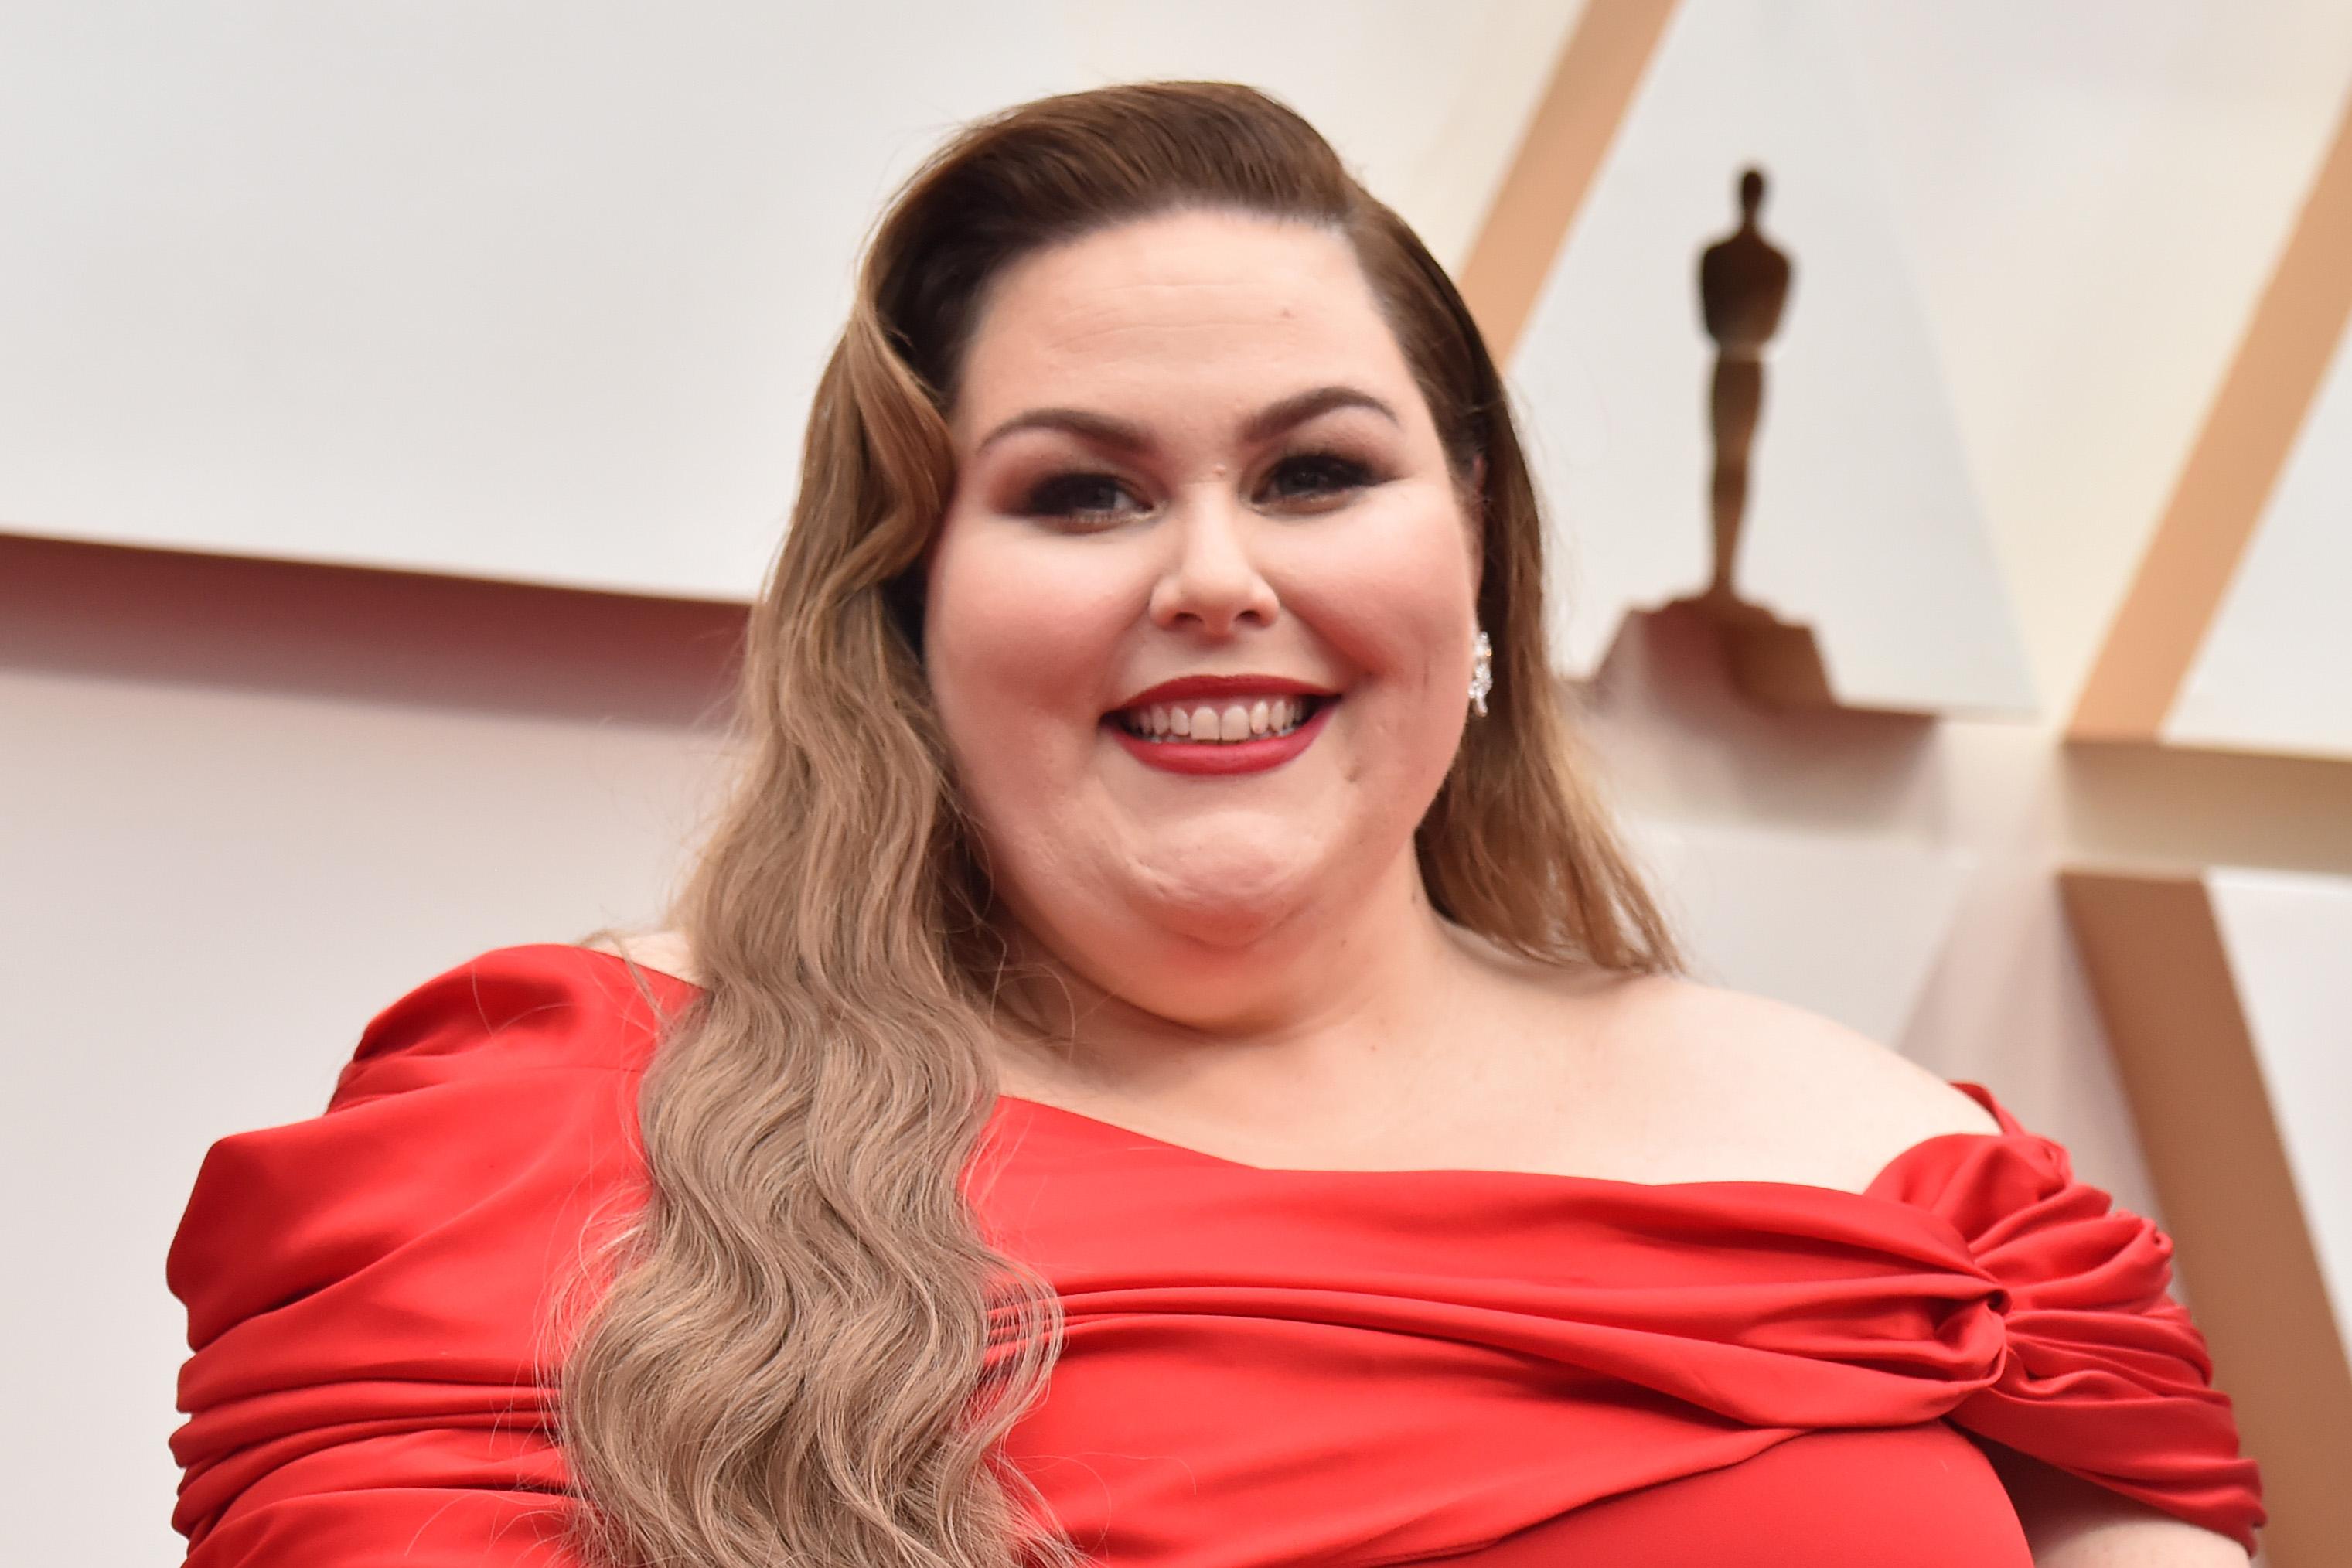 'This Is Us' star Chrissy Metz.